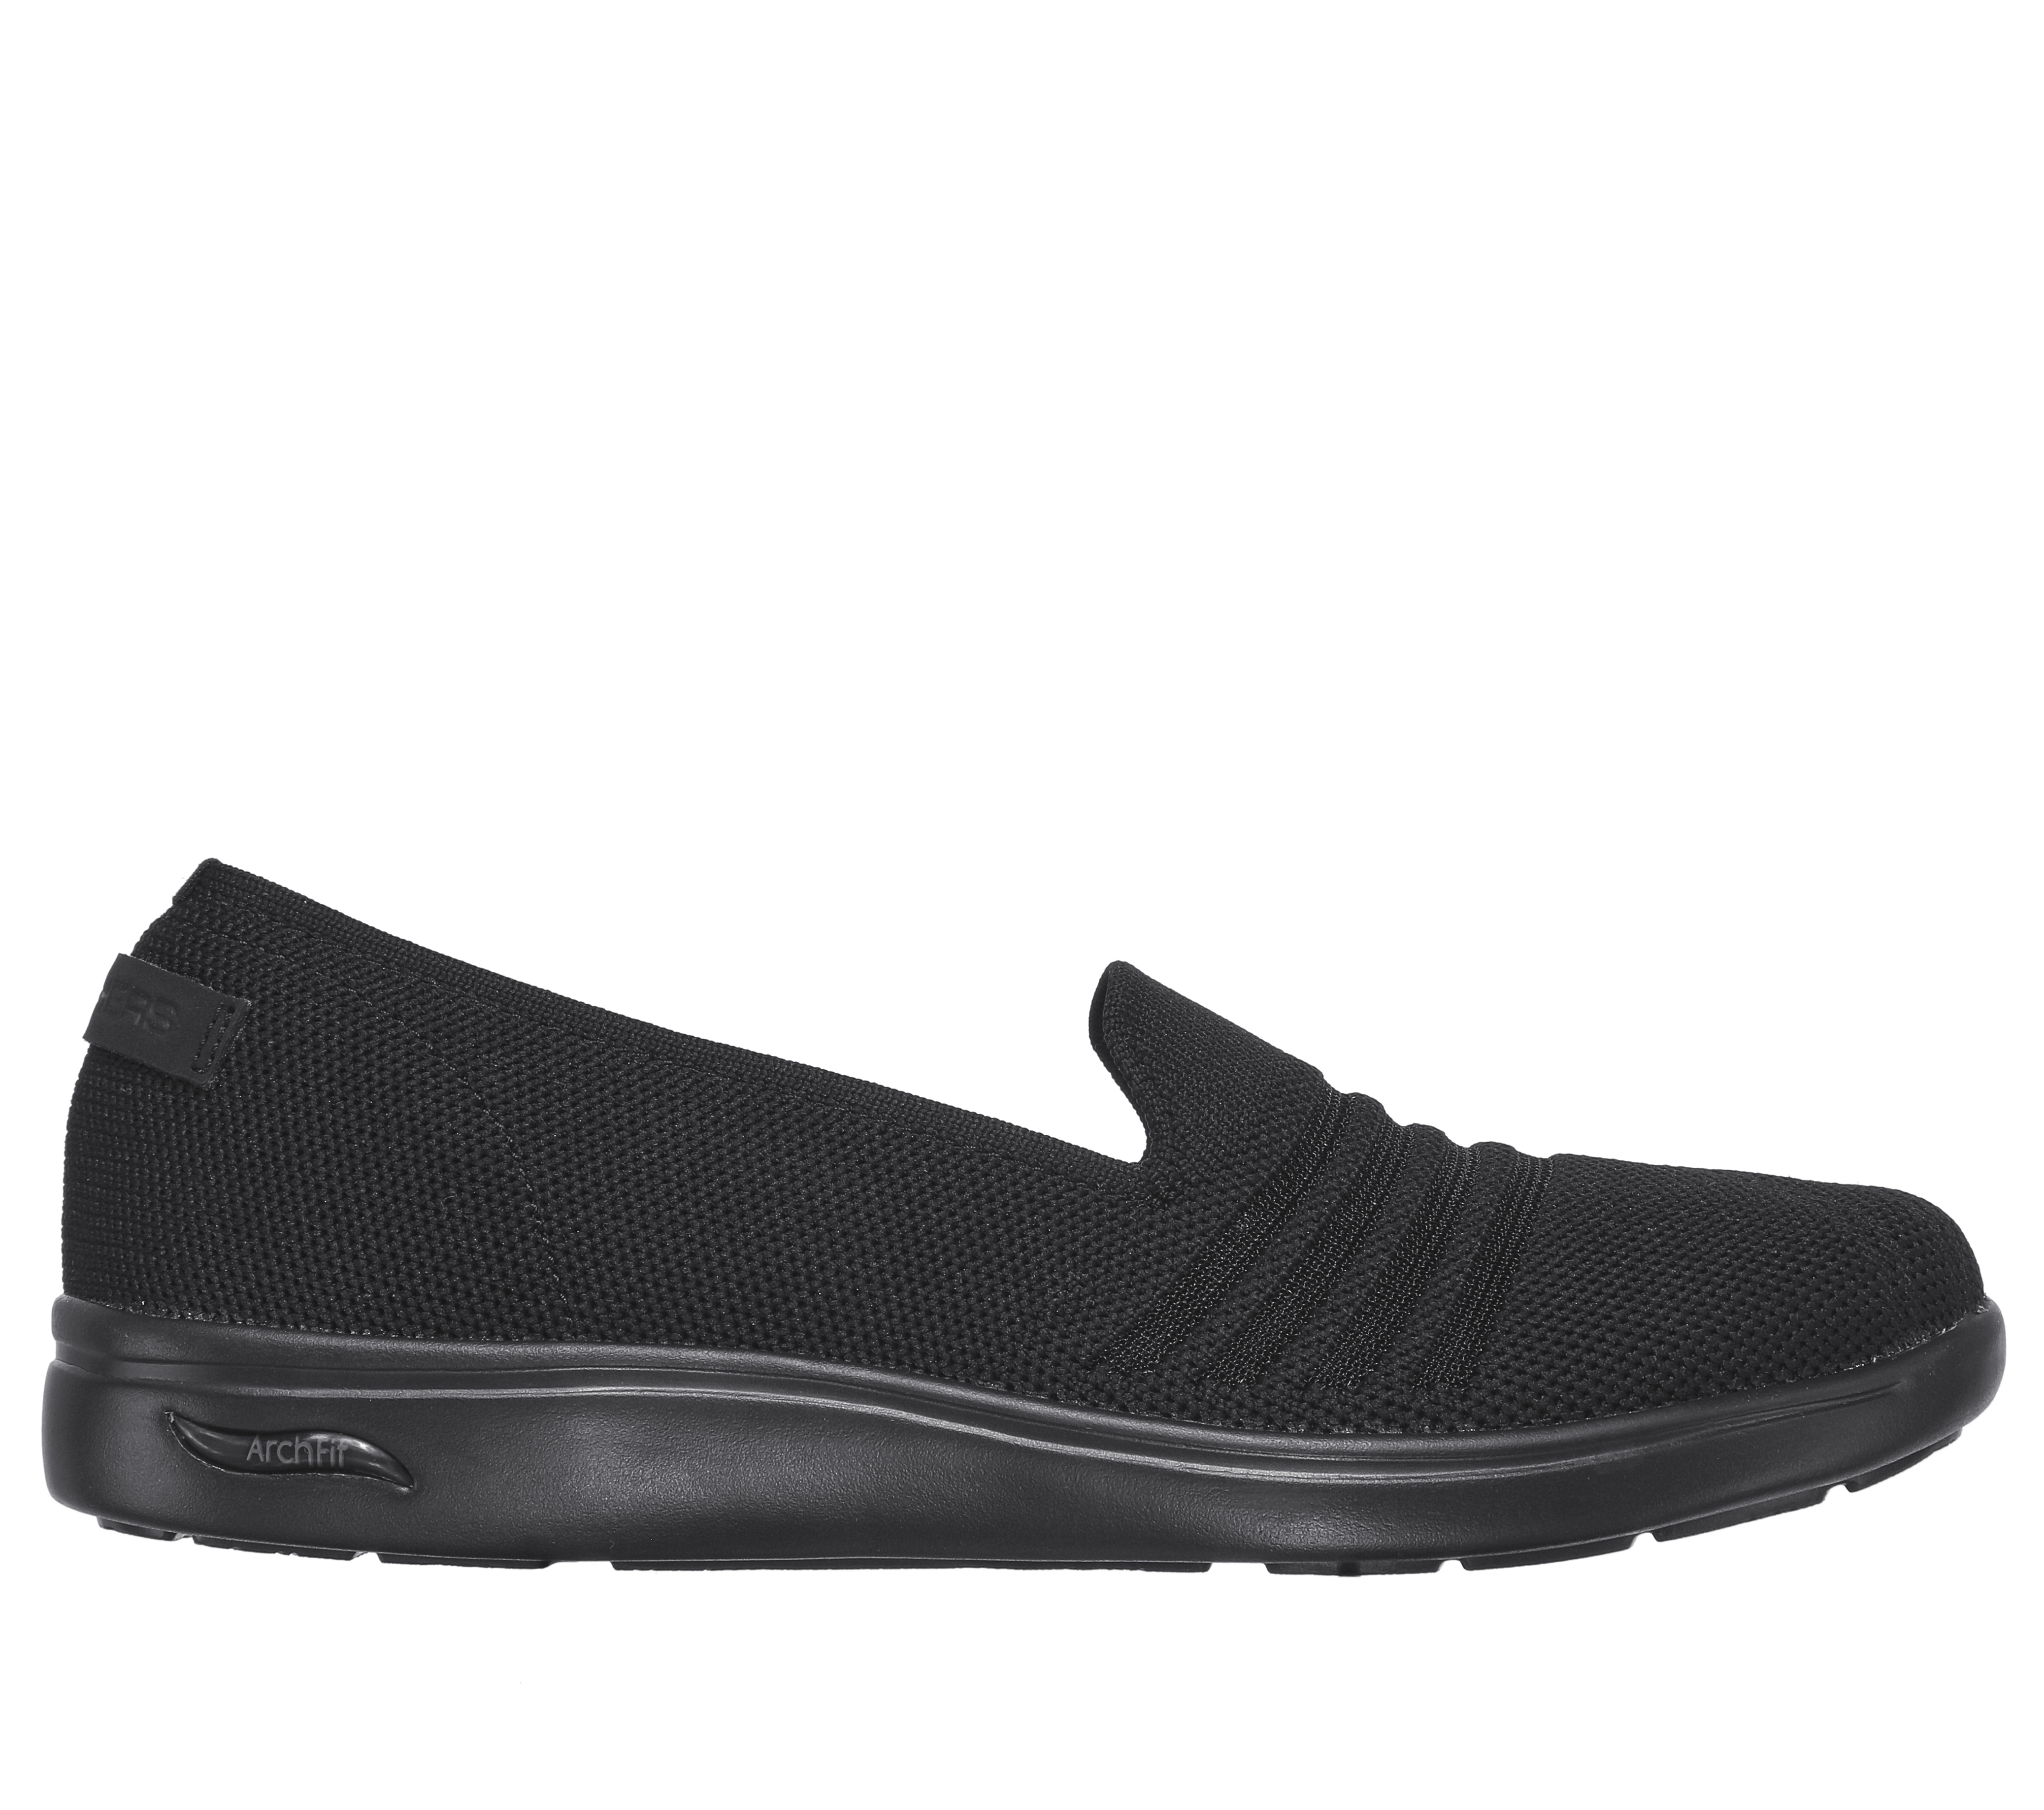 Shop the Skechers Arch Fit Uplift - Cutting Edge | SKECHERS